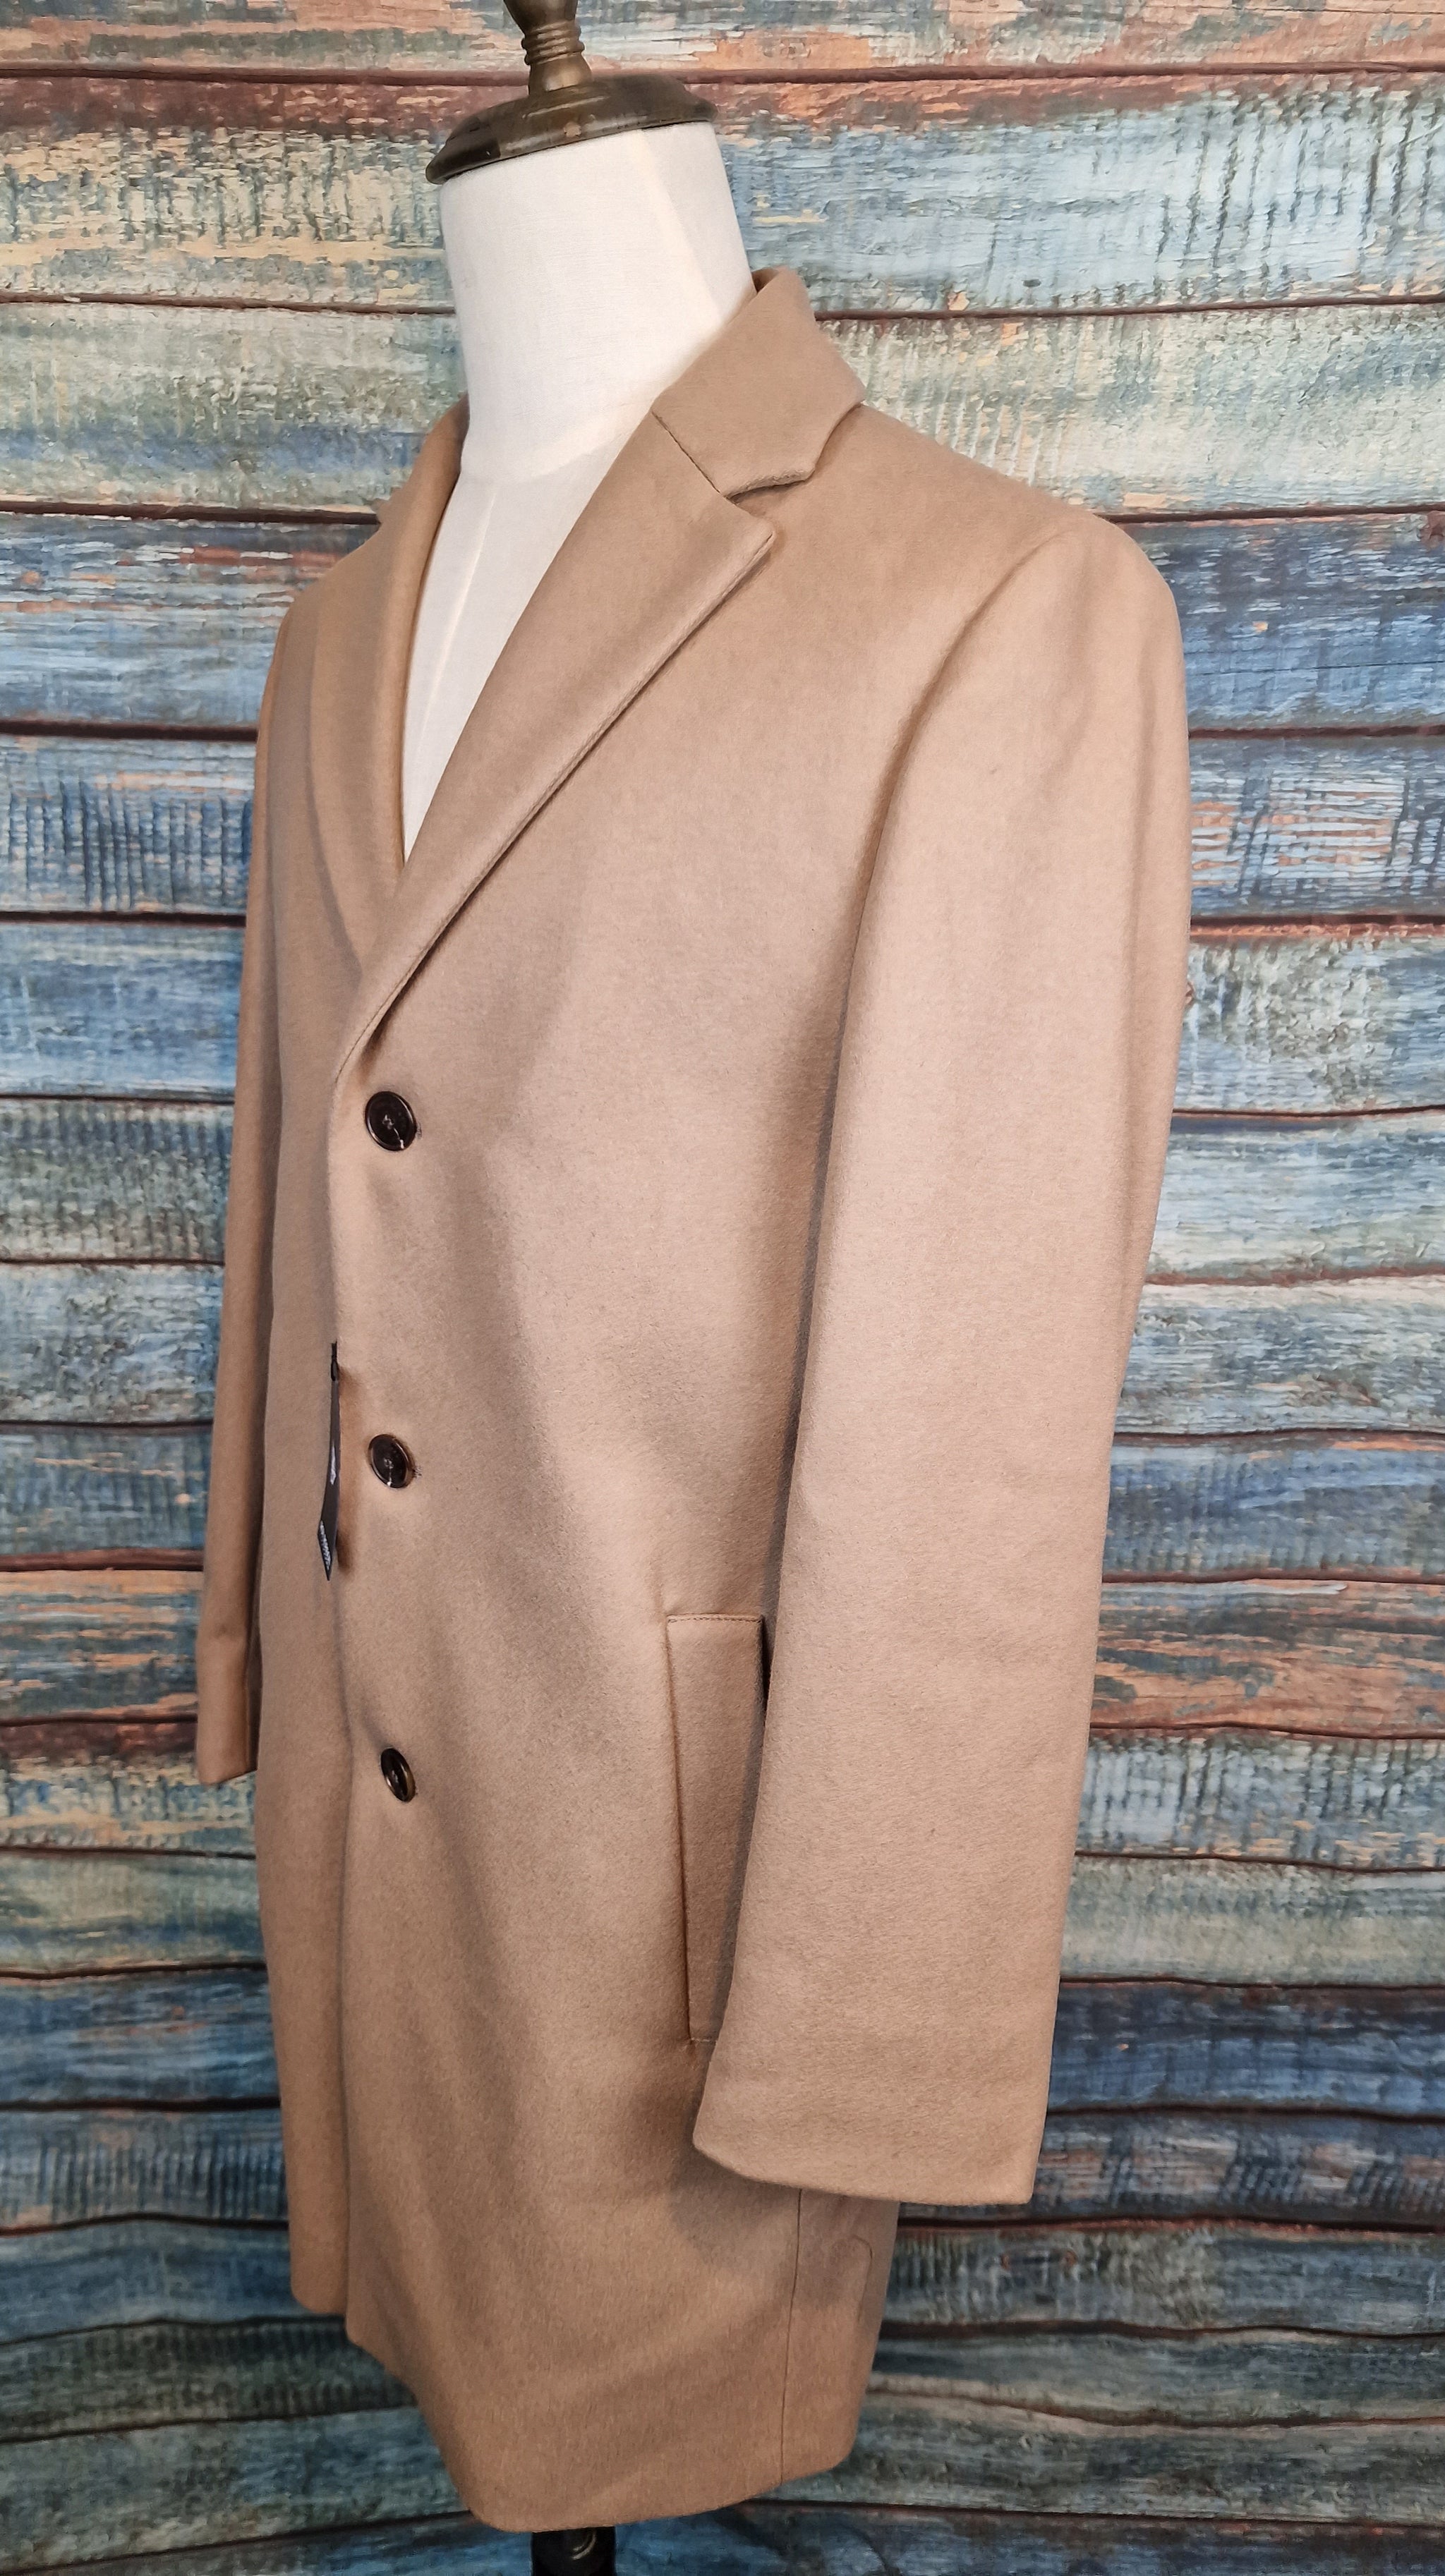 ROY ROBSON Wool and Cashmere overcoats